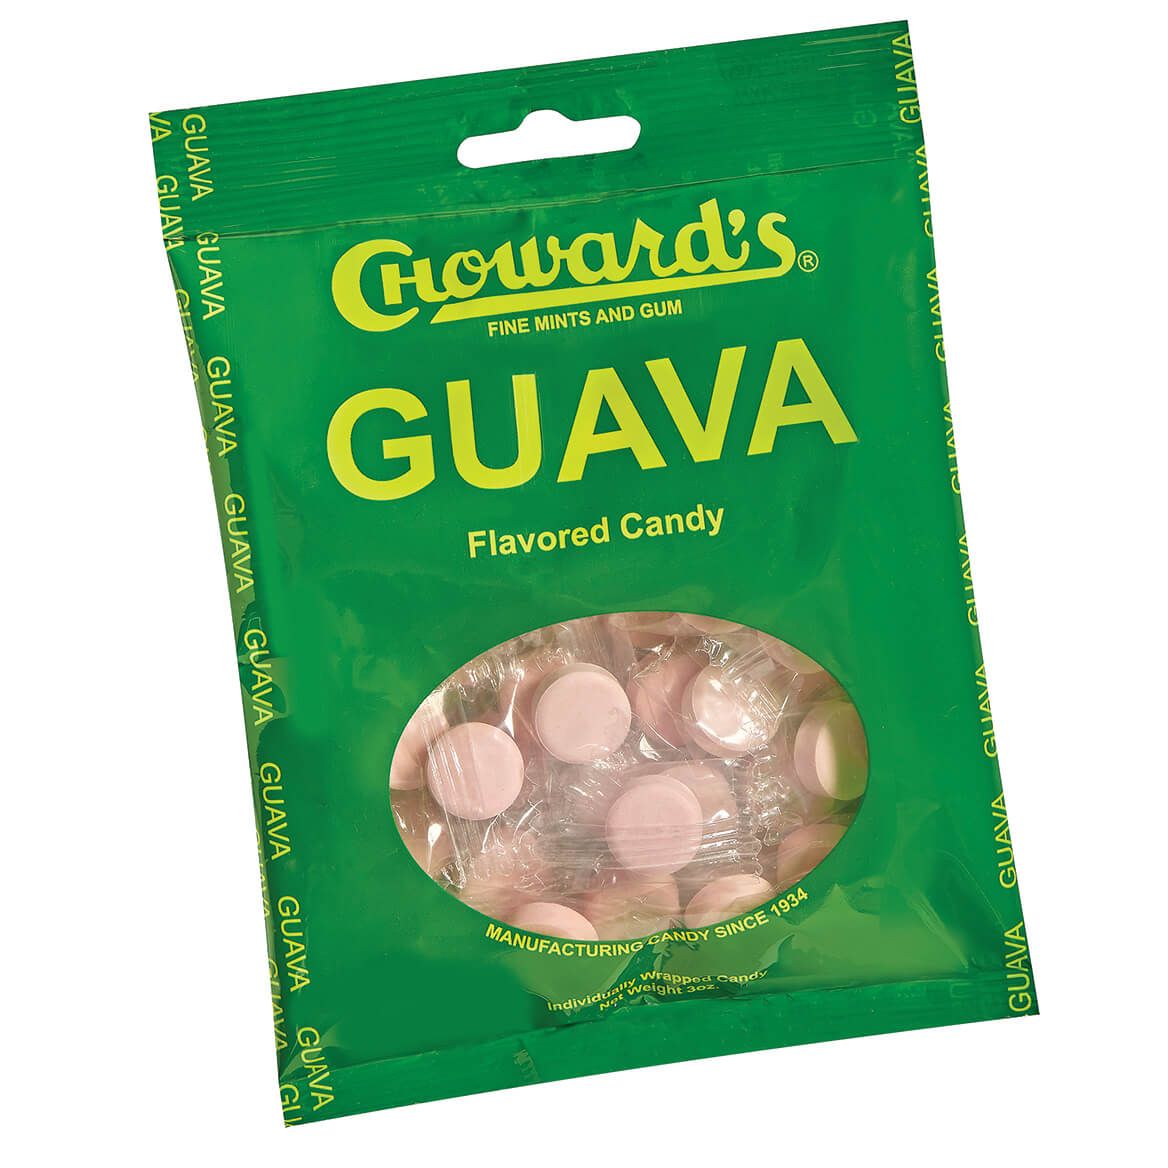 Choward's® Guava Candy, 3 oz. + '-' + 376659